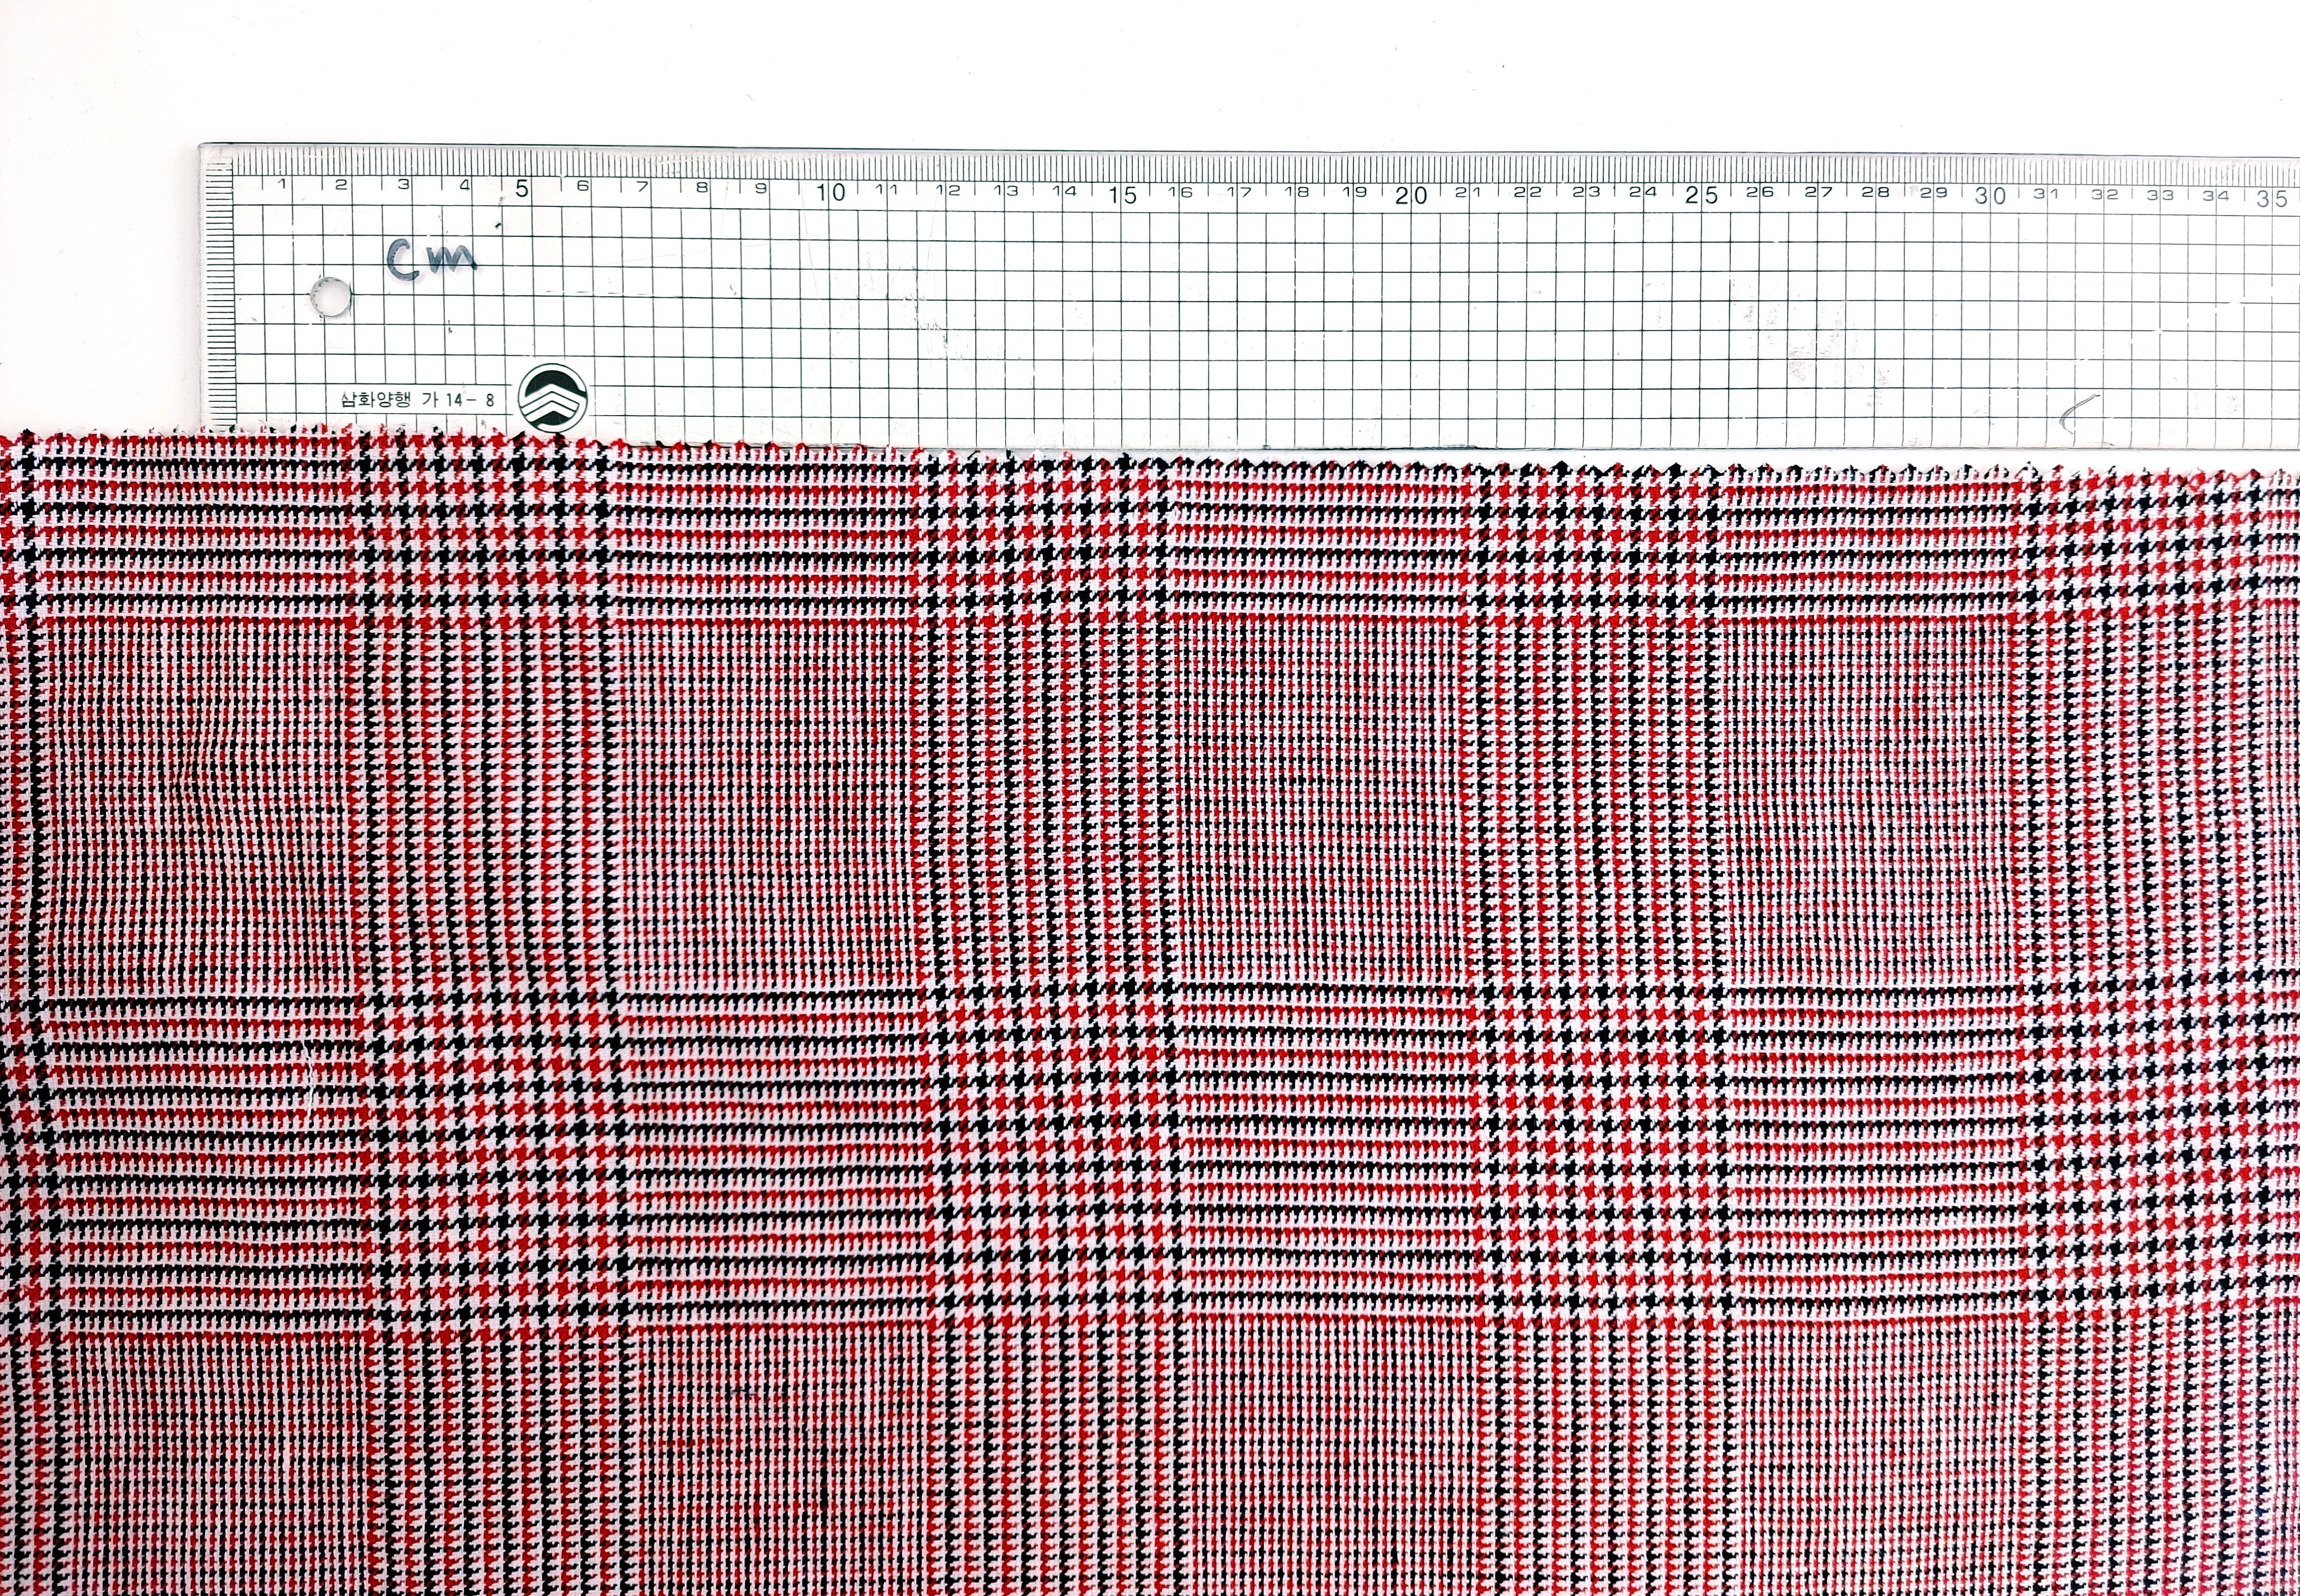 Tricolor Symphony: Linen Cotton Twill Glen Plaid Fabric in Medium Weight – White, Red, and Black 6759